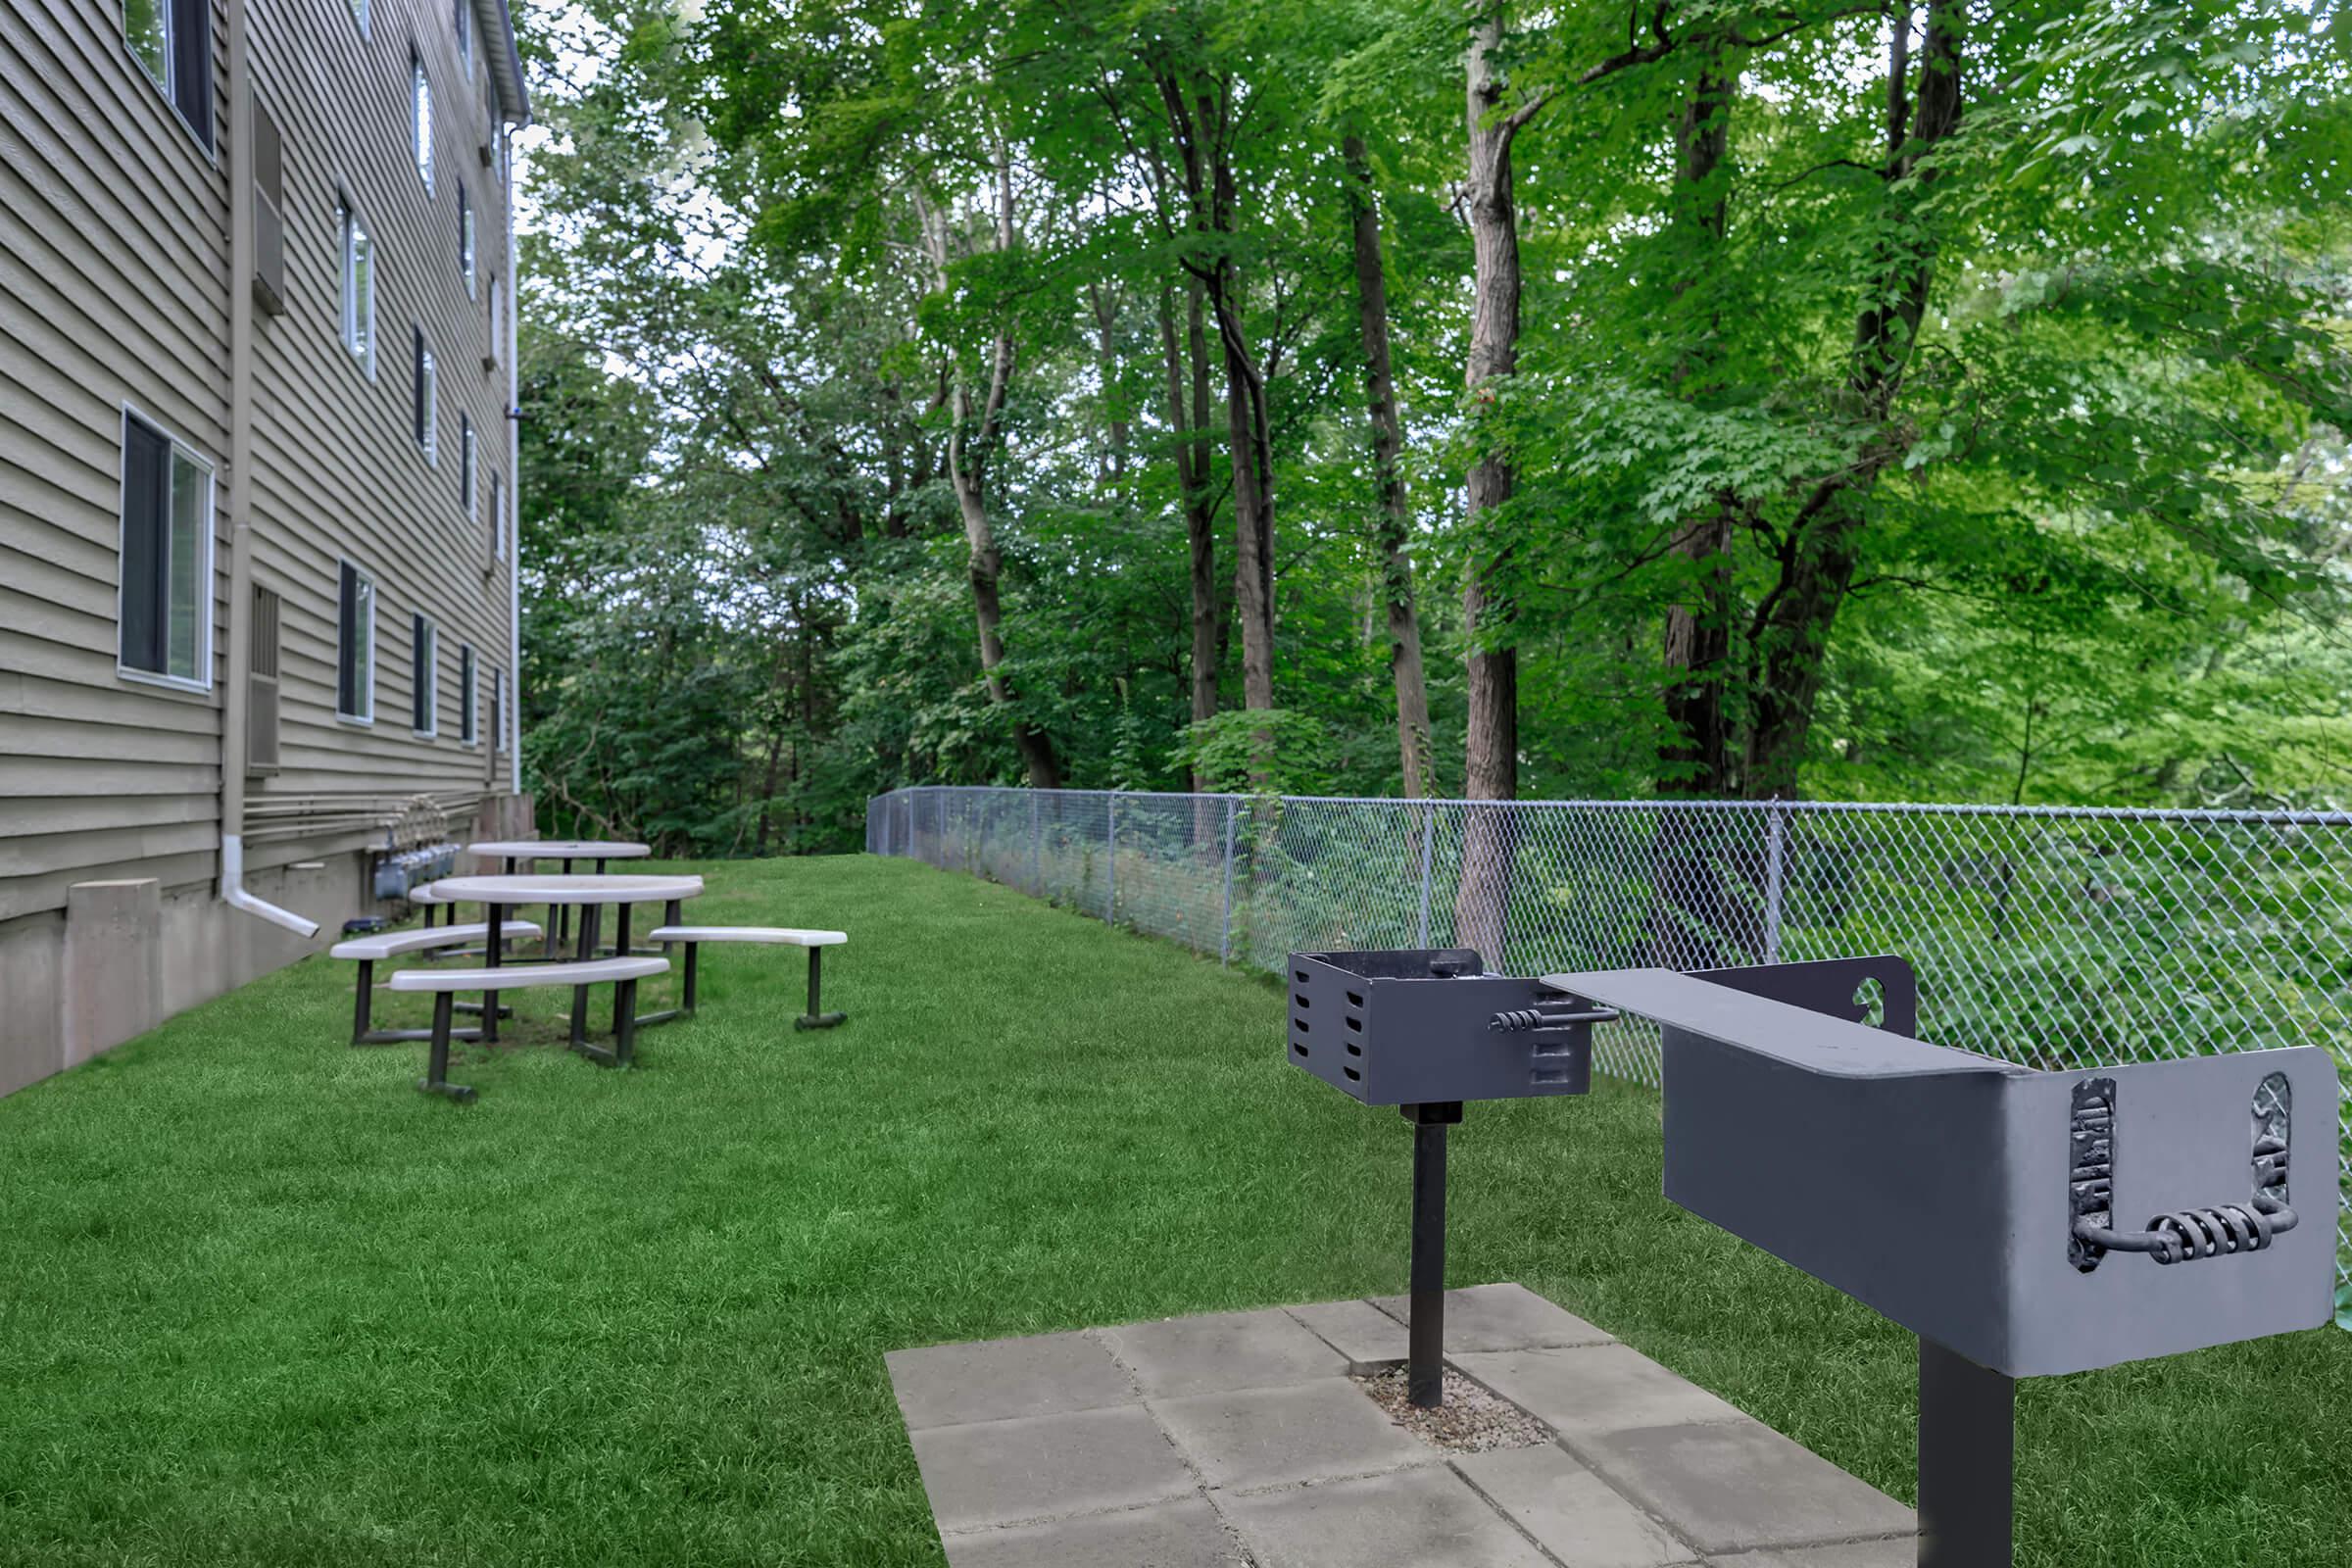 ENJOY THE PICNIC AREA WITH BARBECUE AT LAKEVIEW APARTMENTS